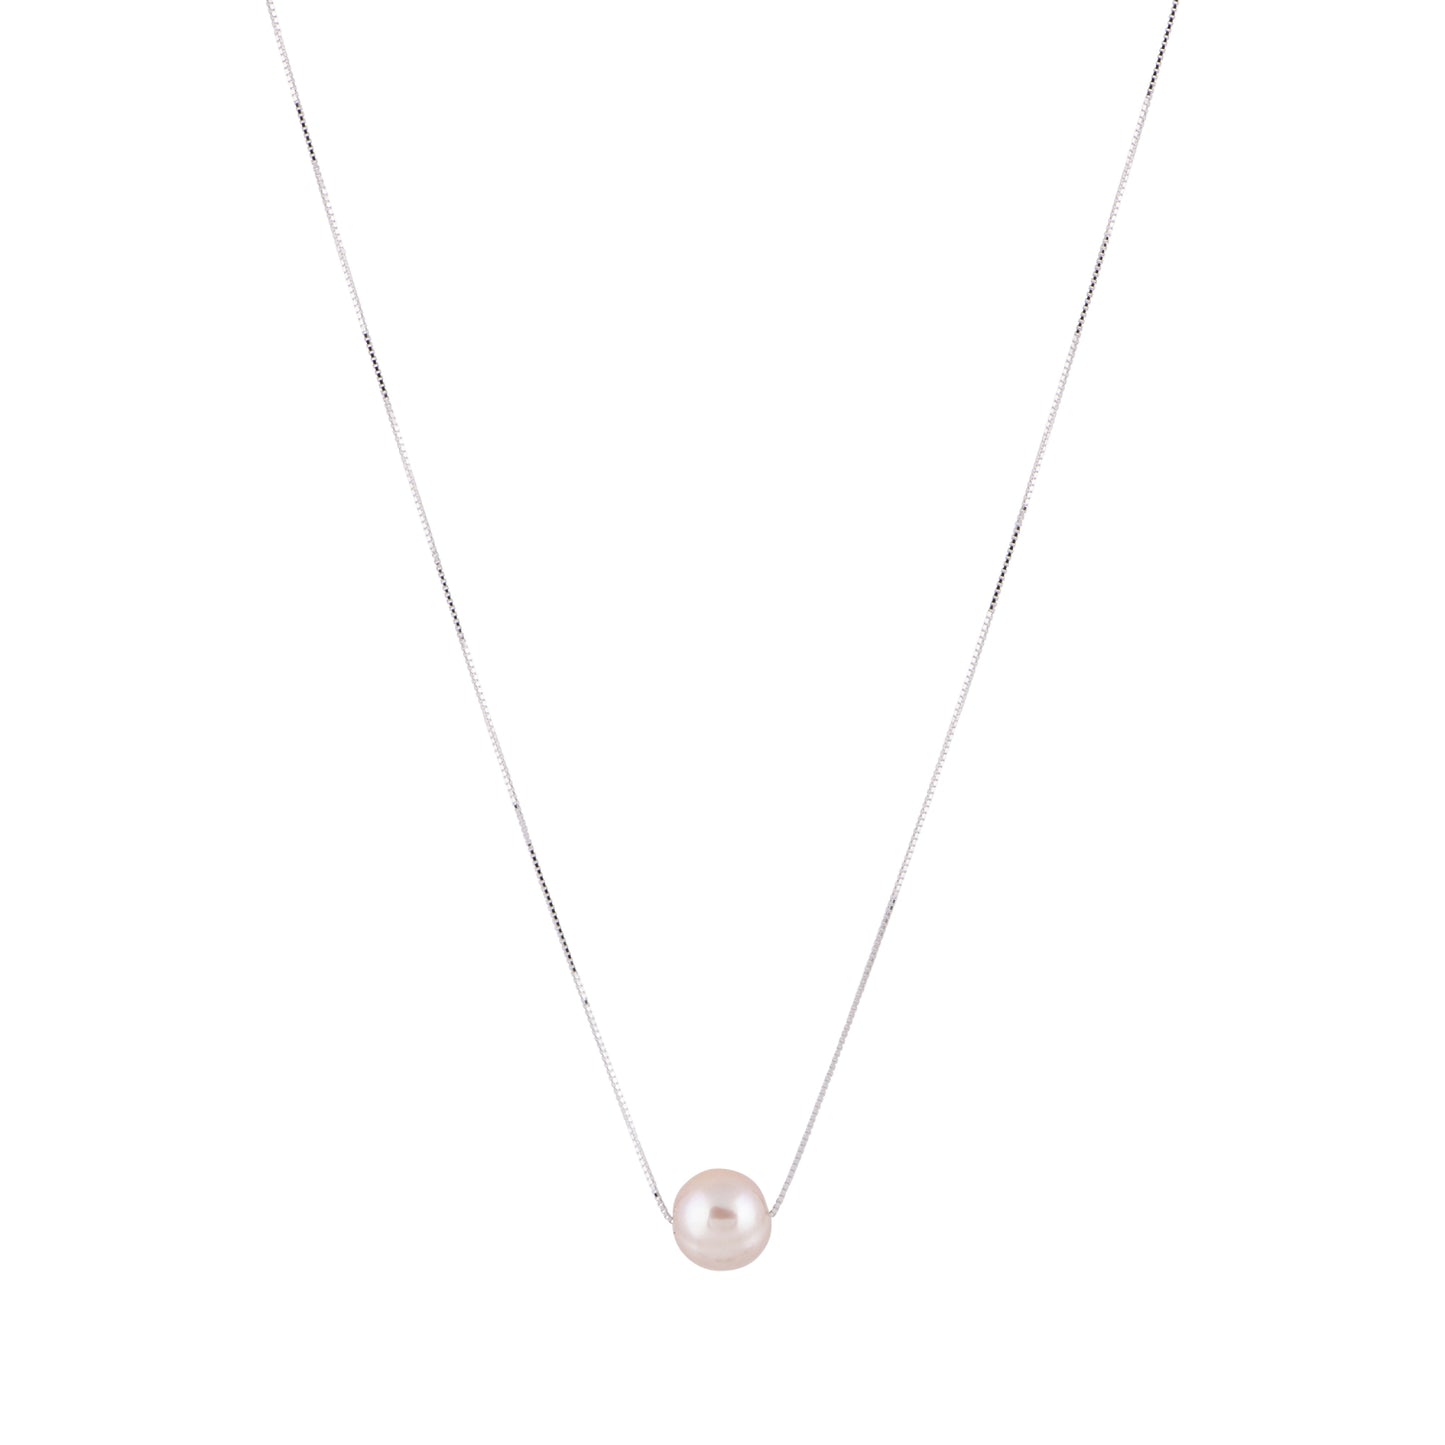 Kelly - Freshwater pearl and sterling silver necklace (Natural pearl)